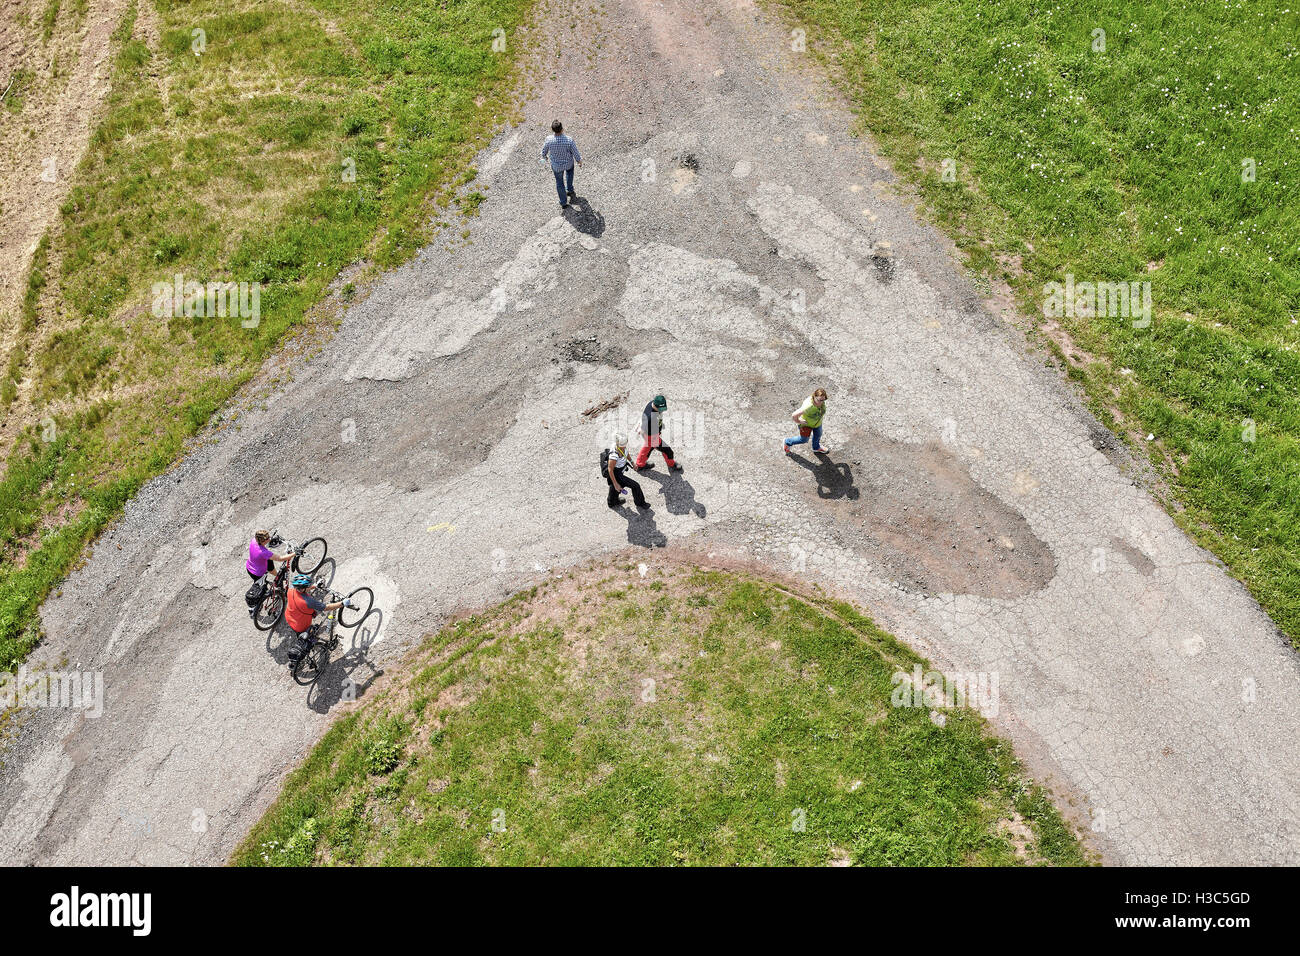 Babi, Czech Republic - May 28, 2016: Aerial picture of a dirt road crossroads with people walking in different directions. Stock Photo